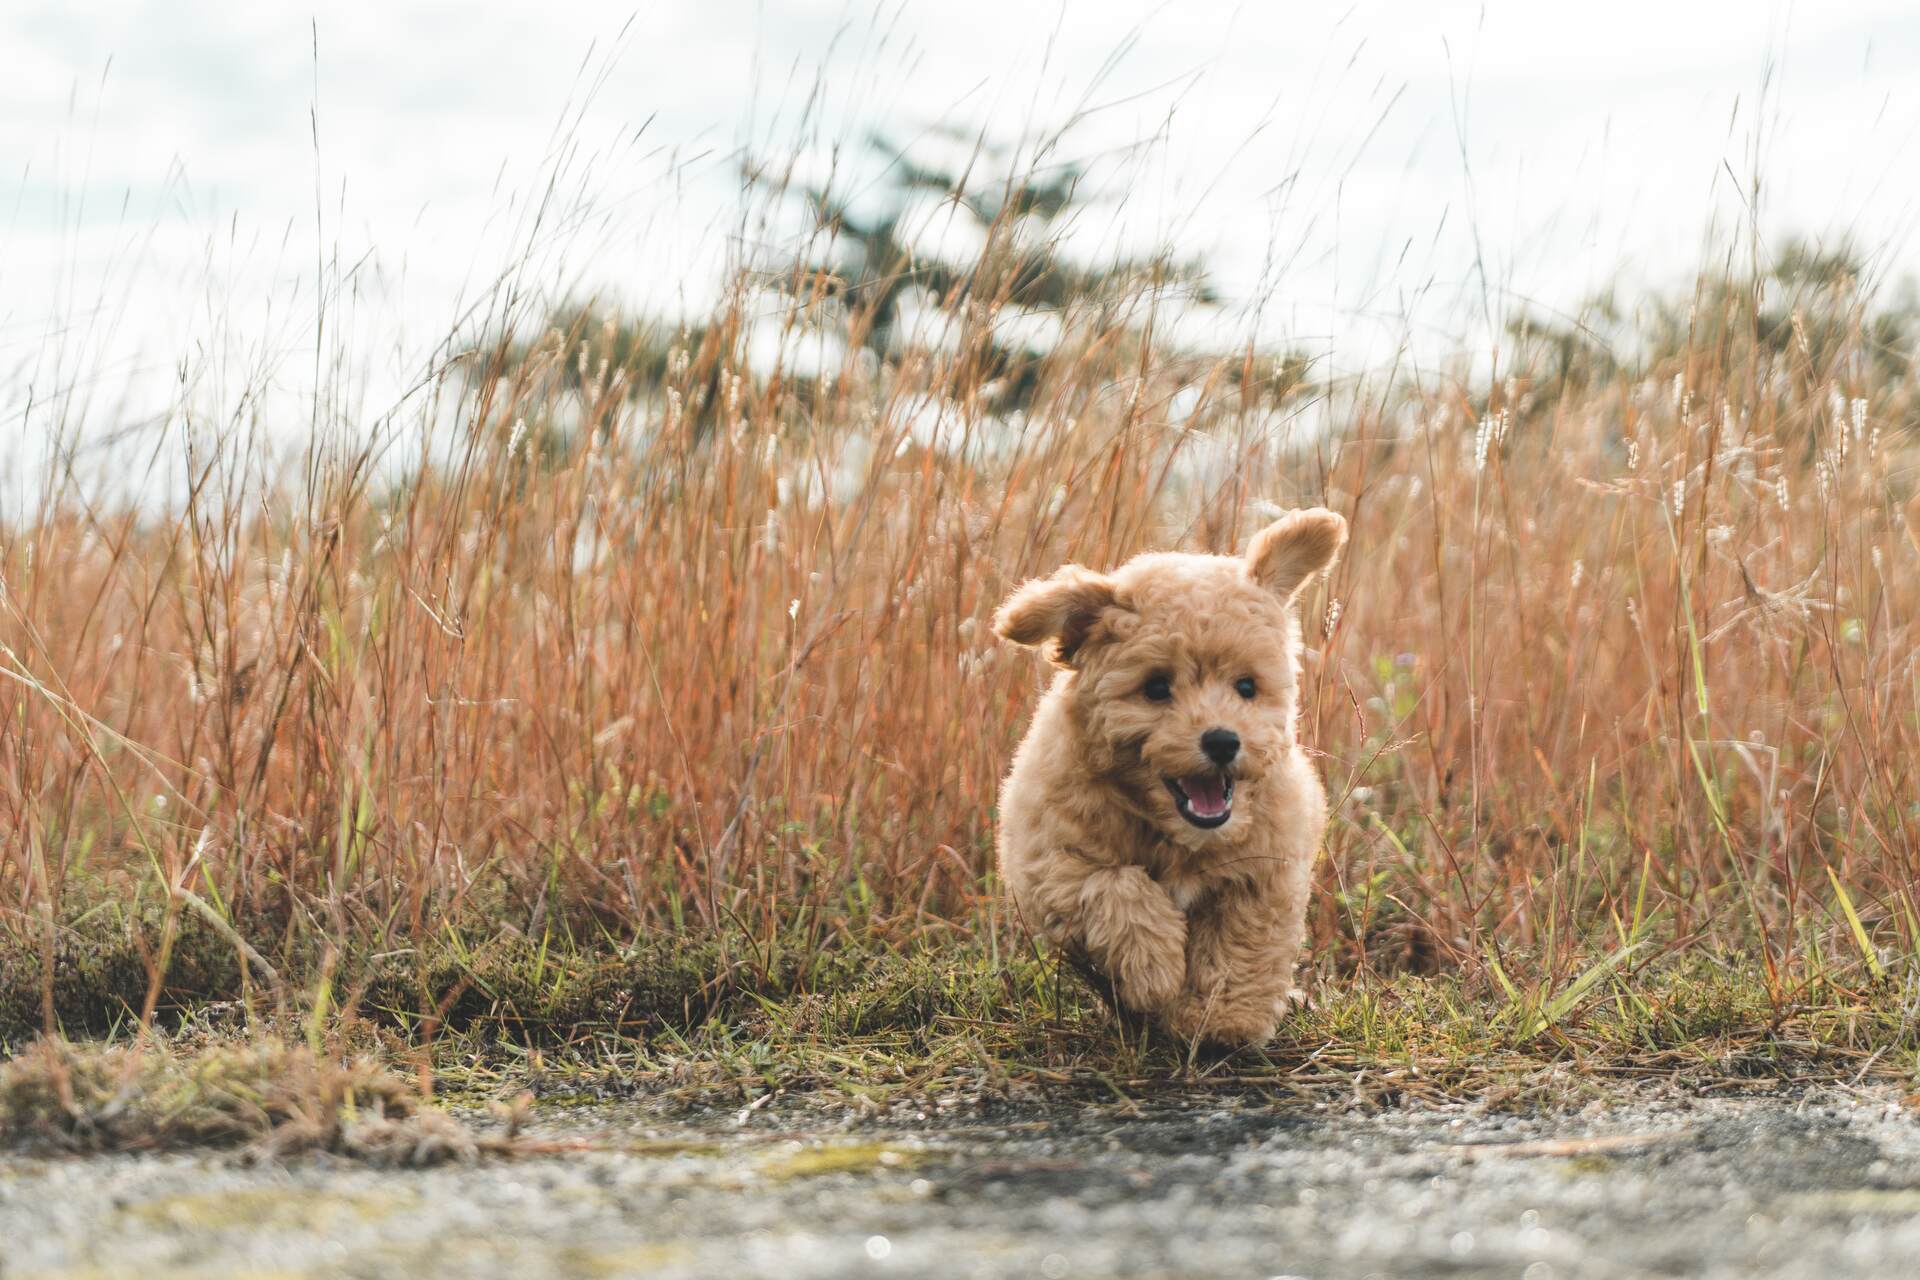 A small puppy running off the leash through a field